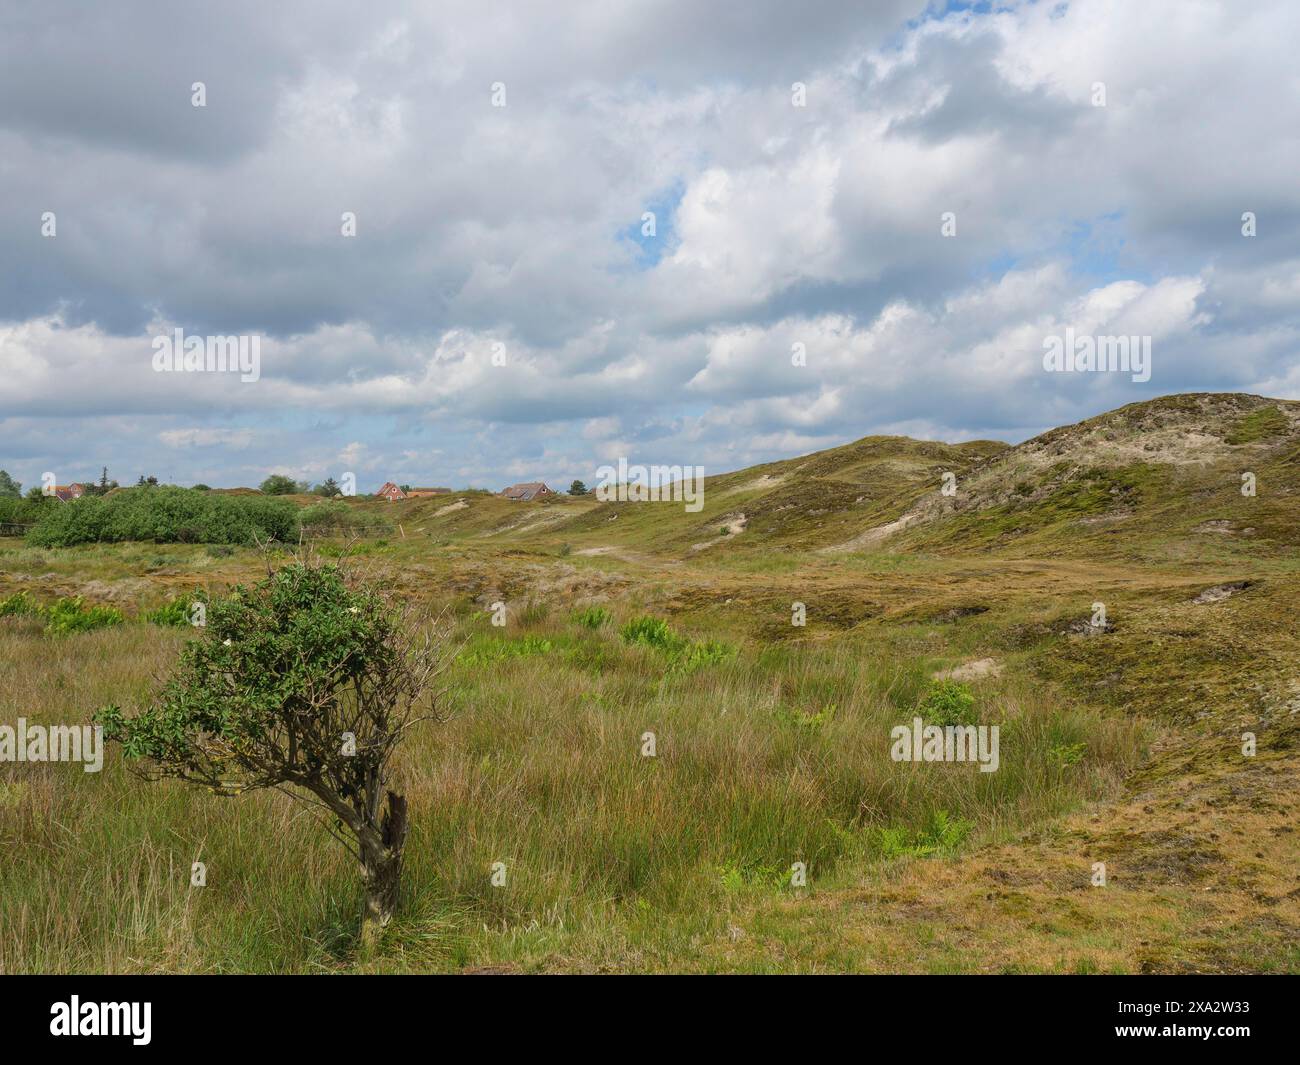 Hilly, grassy landscape with a small tree under a cloudy sky, Baltrum Germany Stock Photo